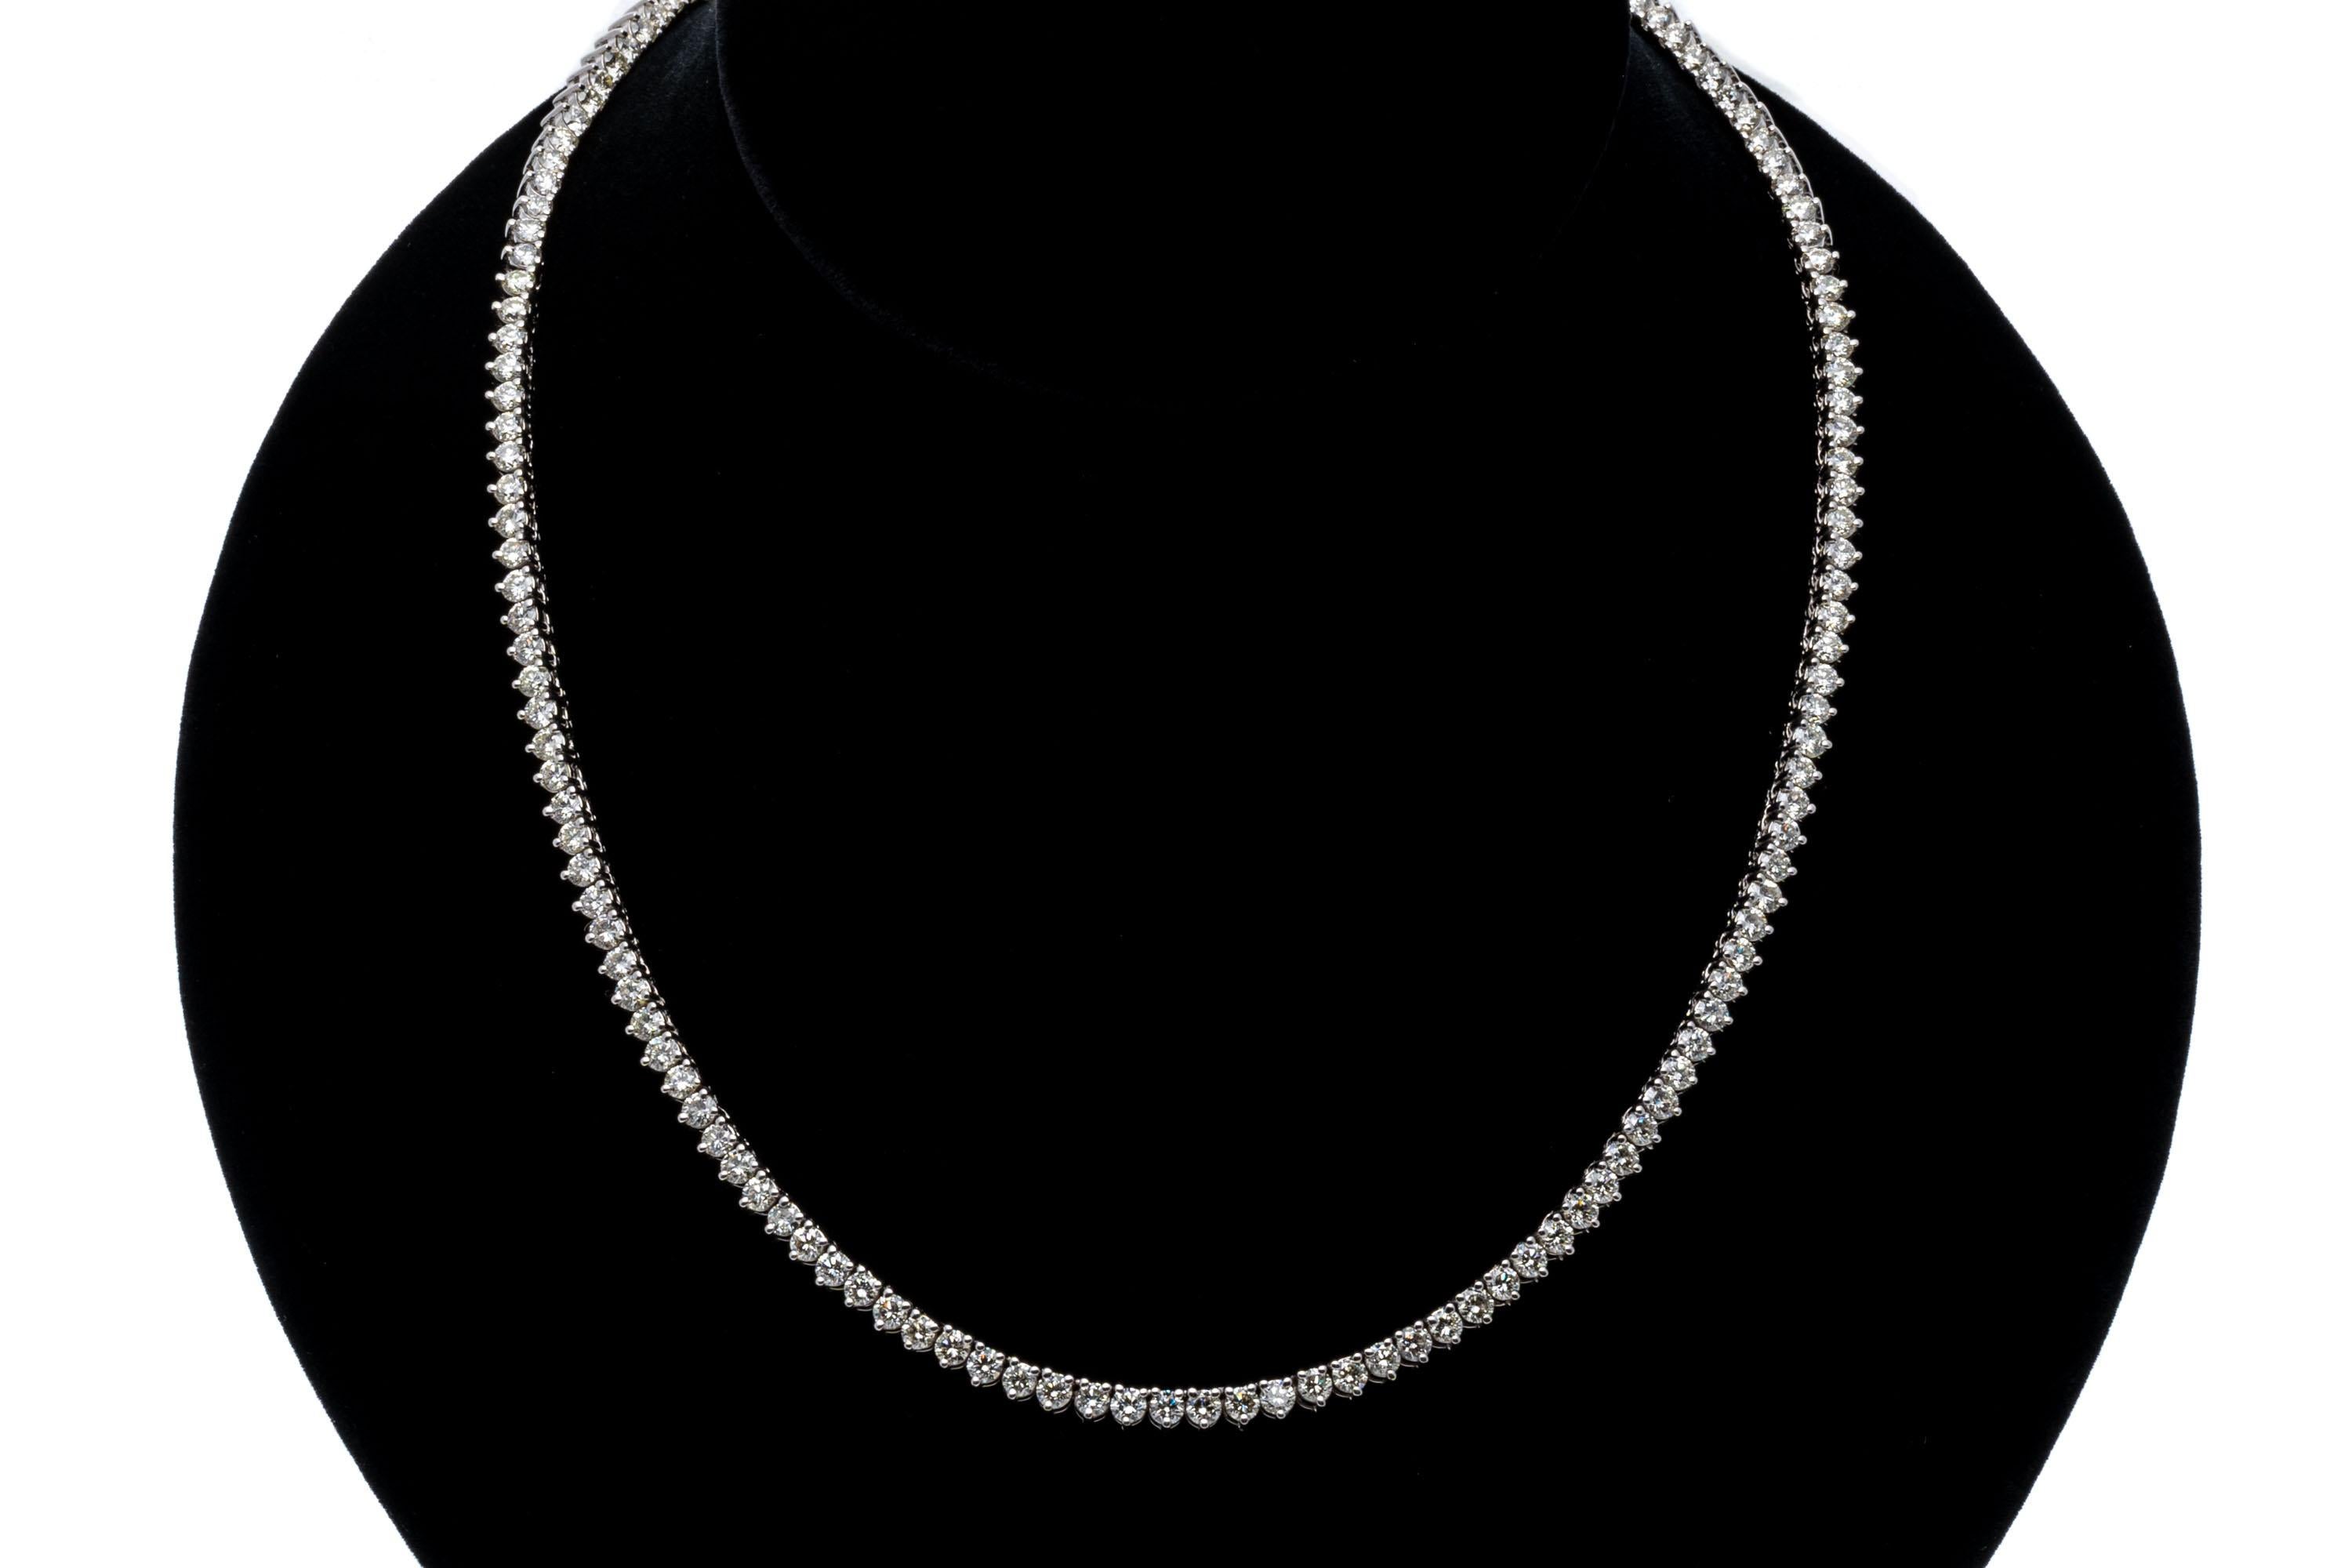 14k white gold necklace. This elegant necklace is a white gold diamond line neck, with the slightest taper of round brilliant cut diamonds set into three prong mountings to show off the stones and are approximately 11.32 TCW in weight, range from